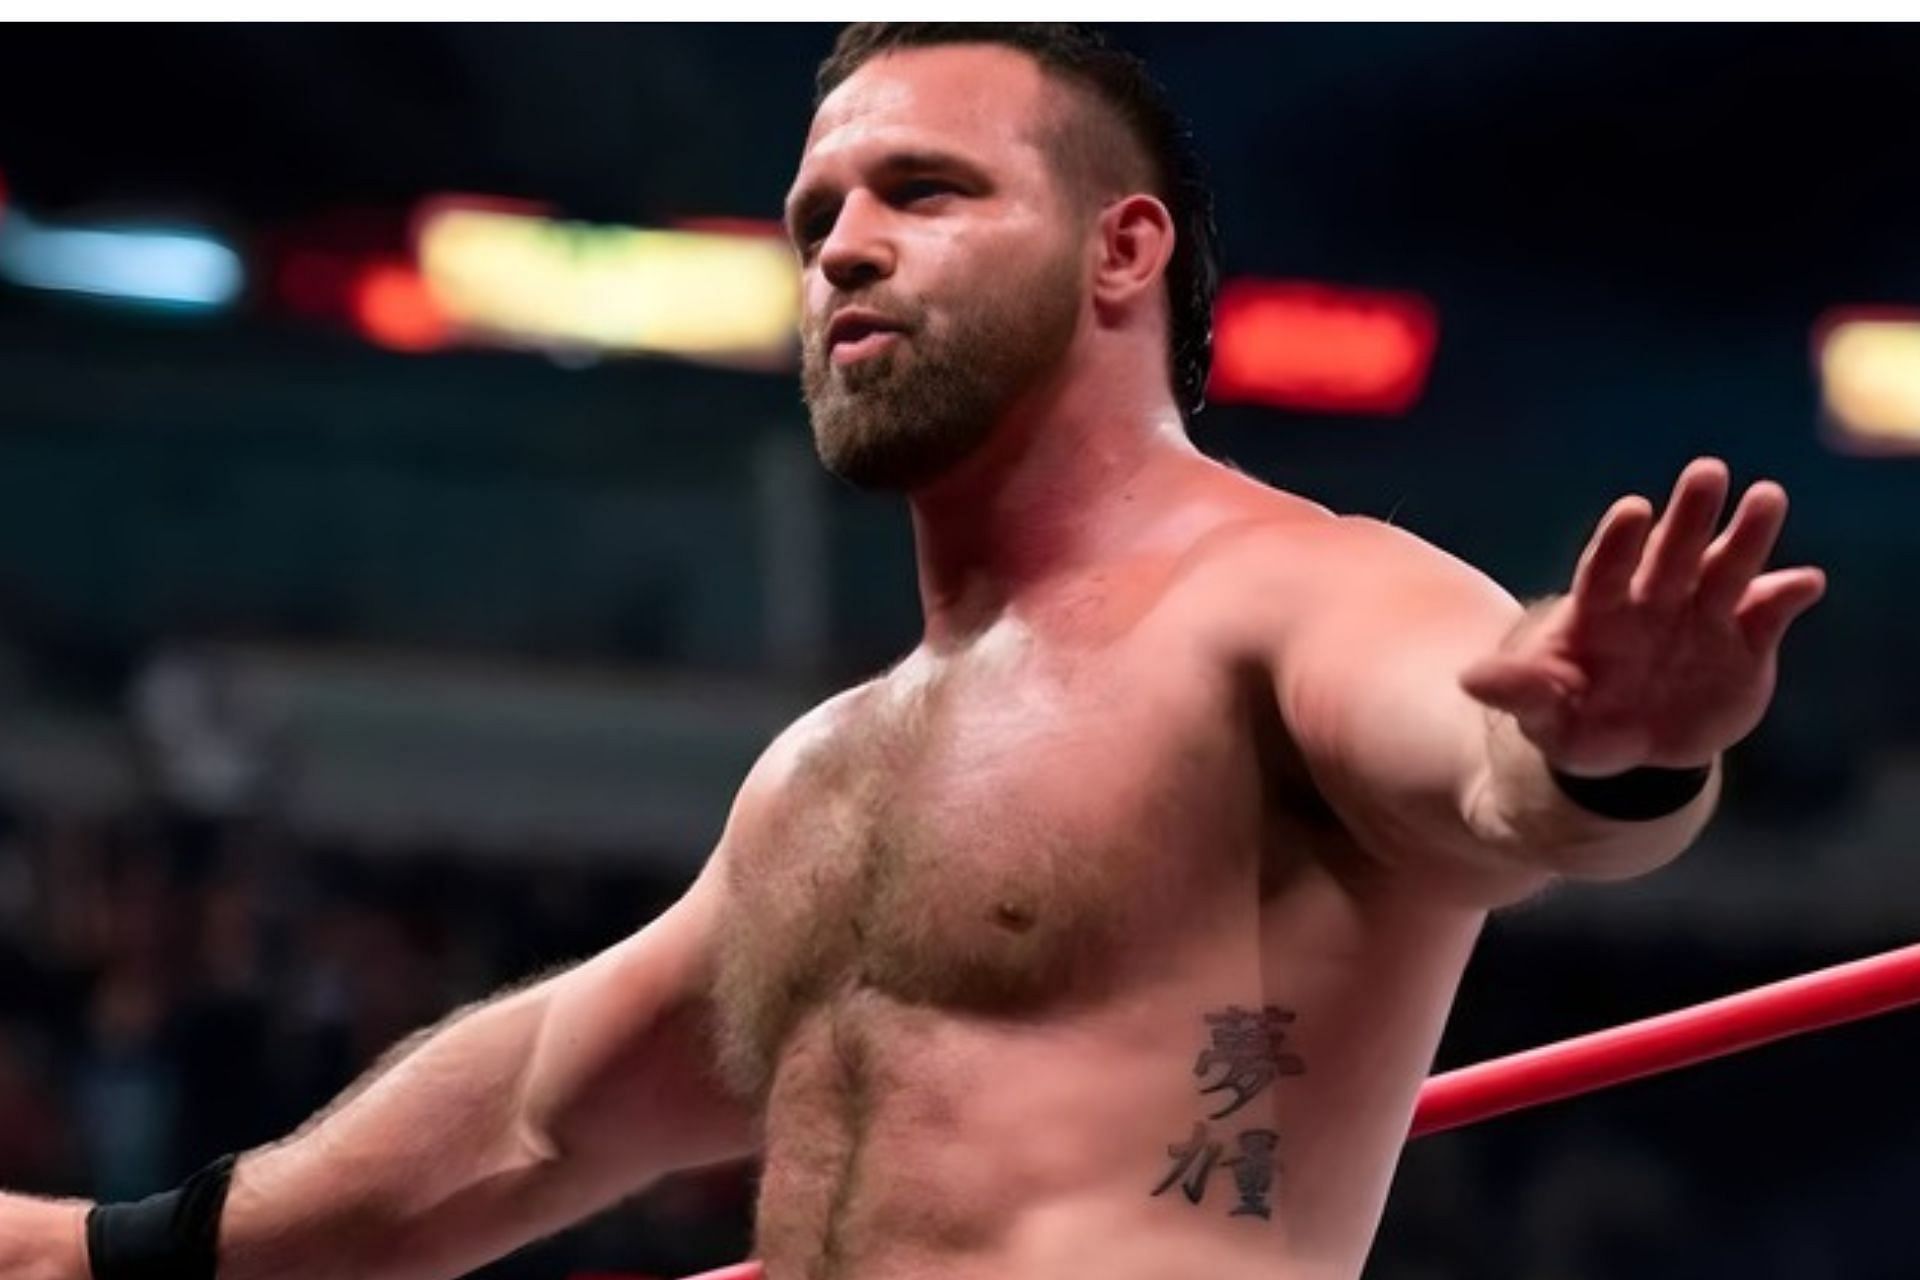 Cash Wheeler was hilariously heckled at AEW: All In